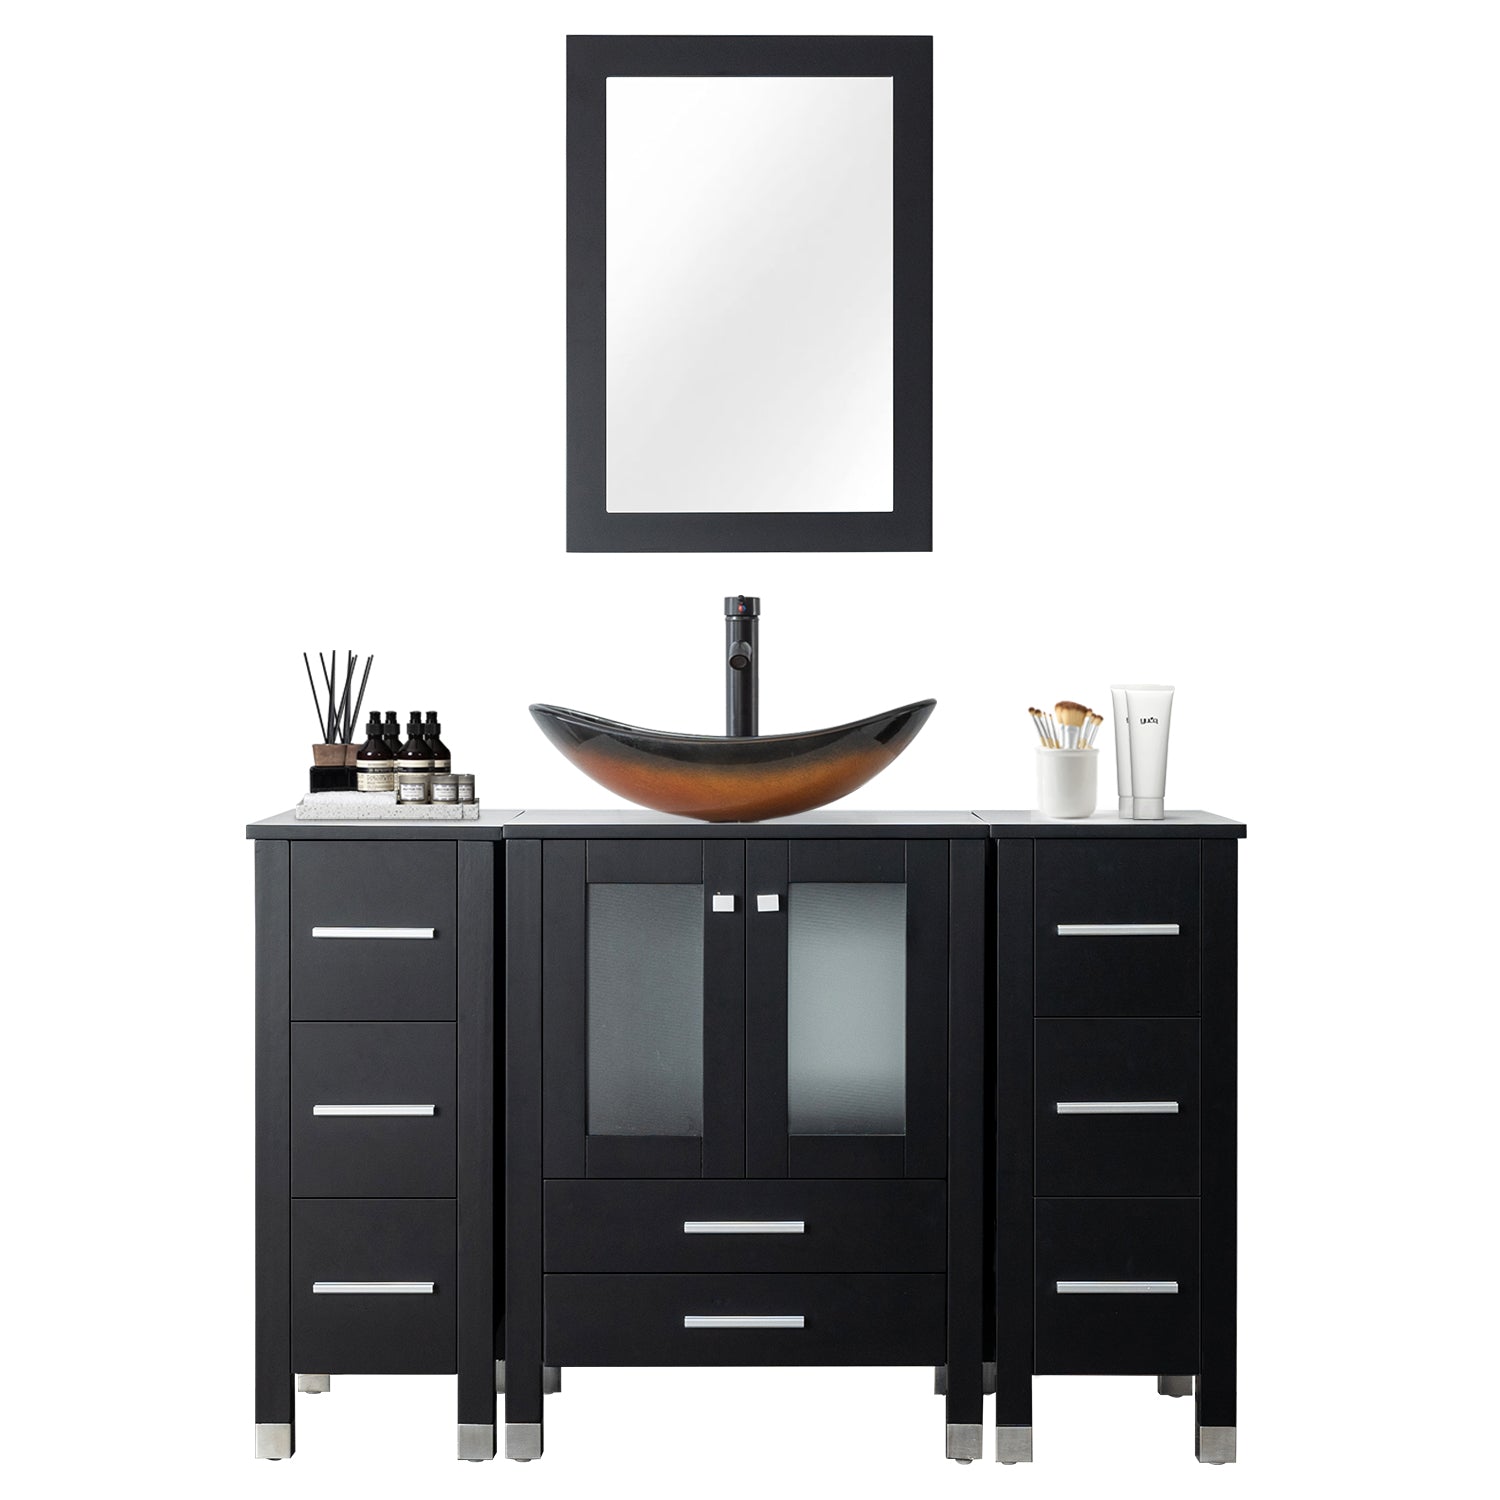 Eclife 48" Morden Bathroom Vanity Combo W/Side Cabinet, Solid Wood Construction and Painted Frame - Black